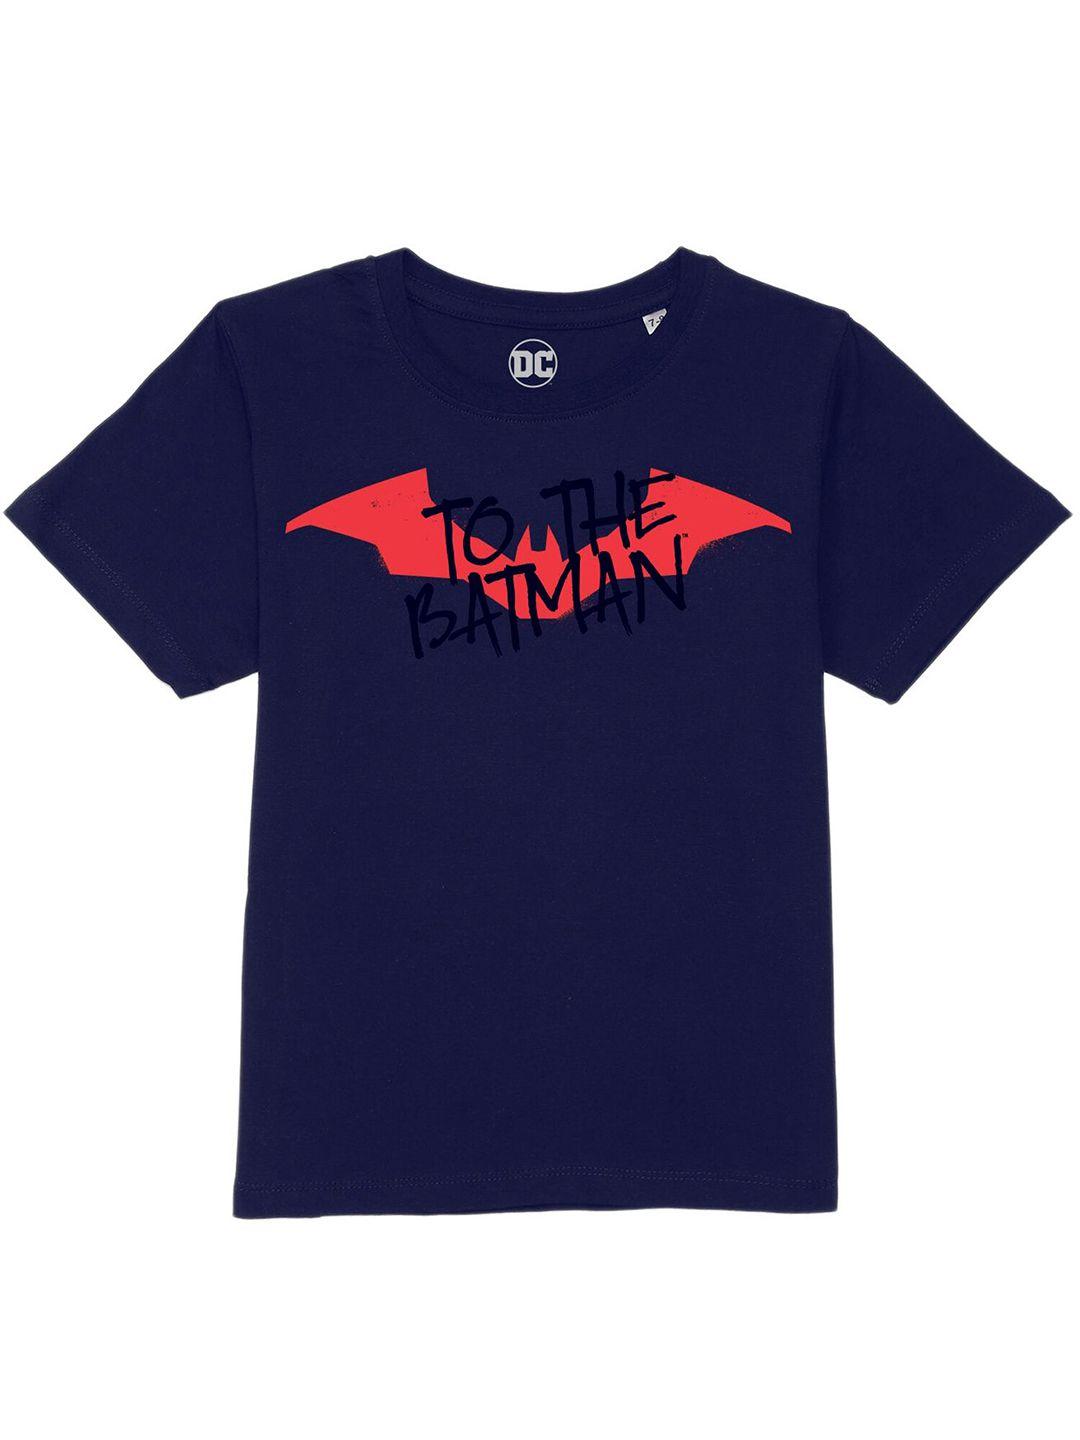 dc by wear your mind boys navy blue graphic printed cotton t-shirt